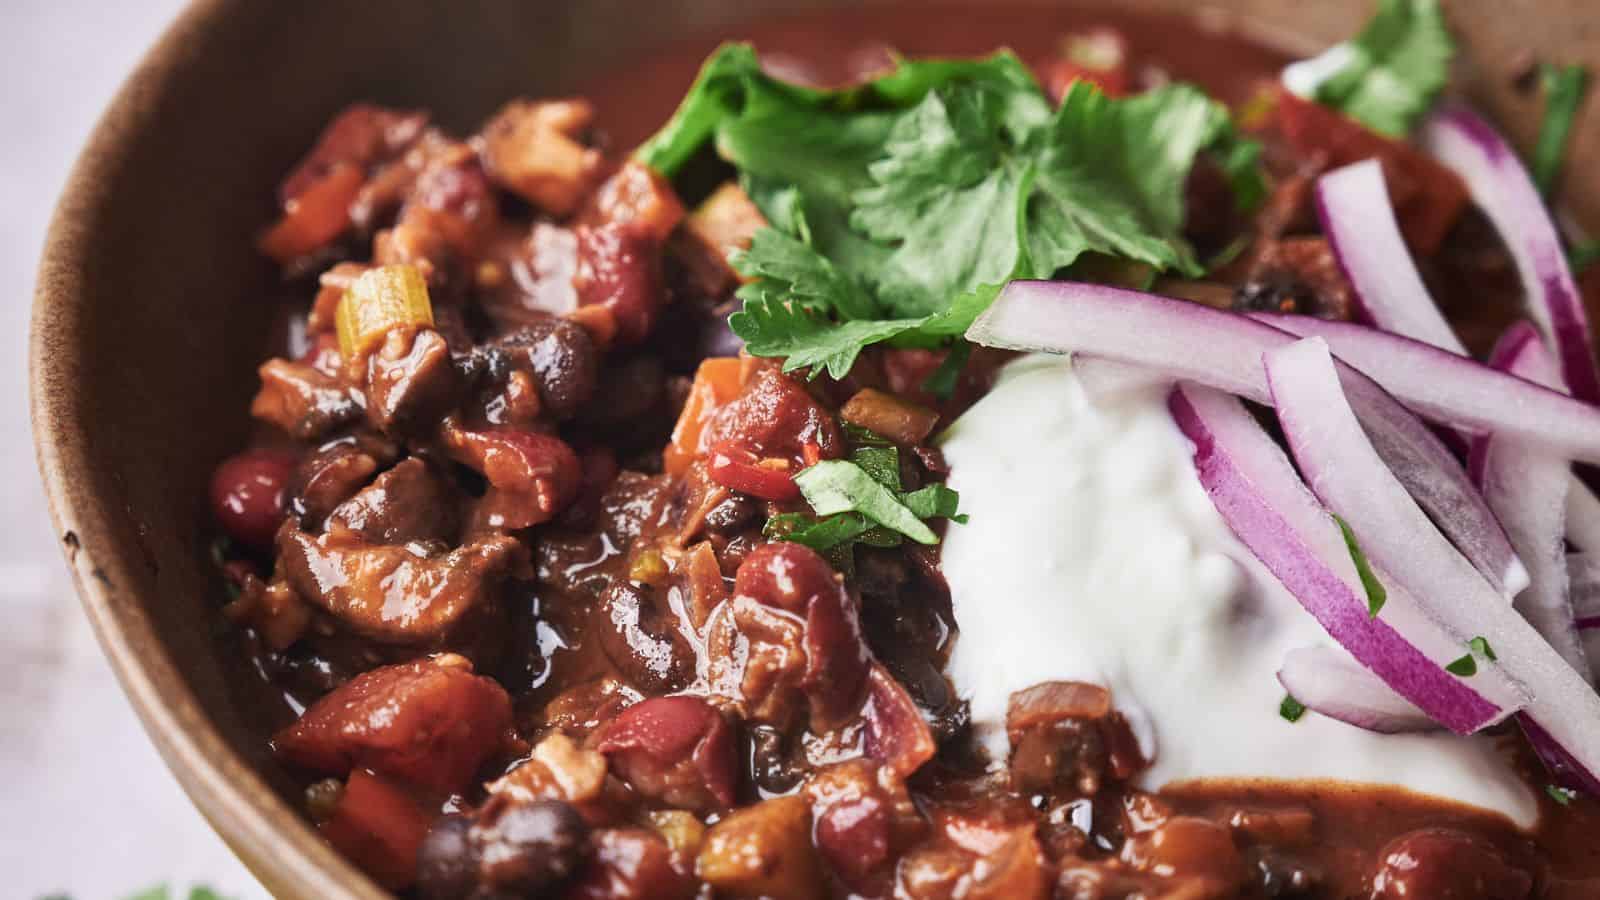 Close-up of a bowl of chili, topped with chopped cilantro, sliced red onions, and a dollop of sour cream. The chili contains beans, tomatoes, and other visible vegetables.